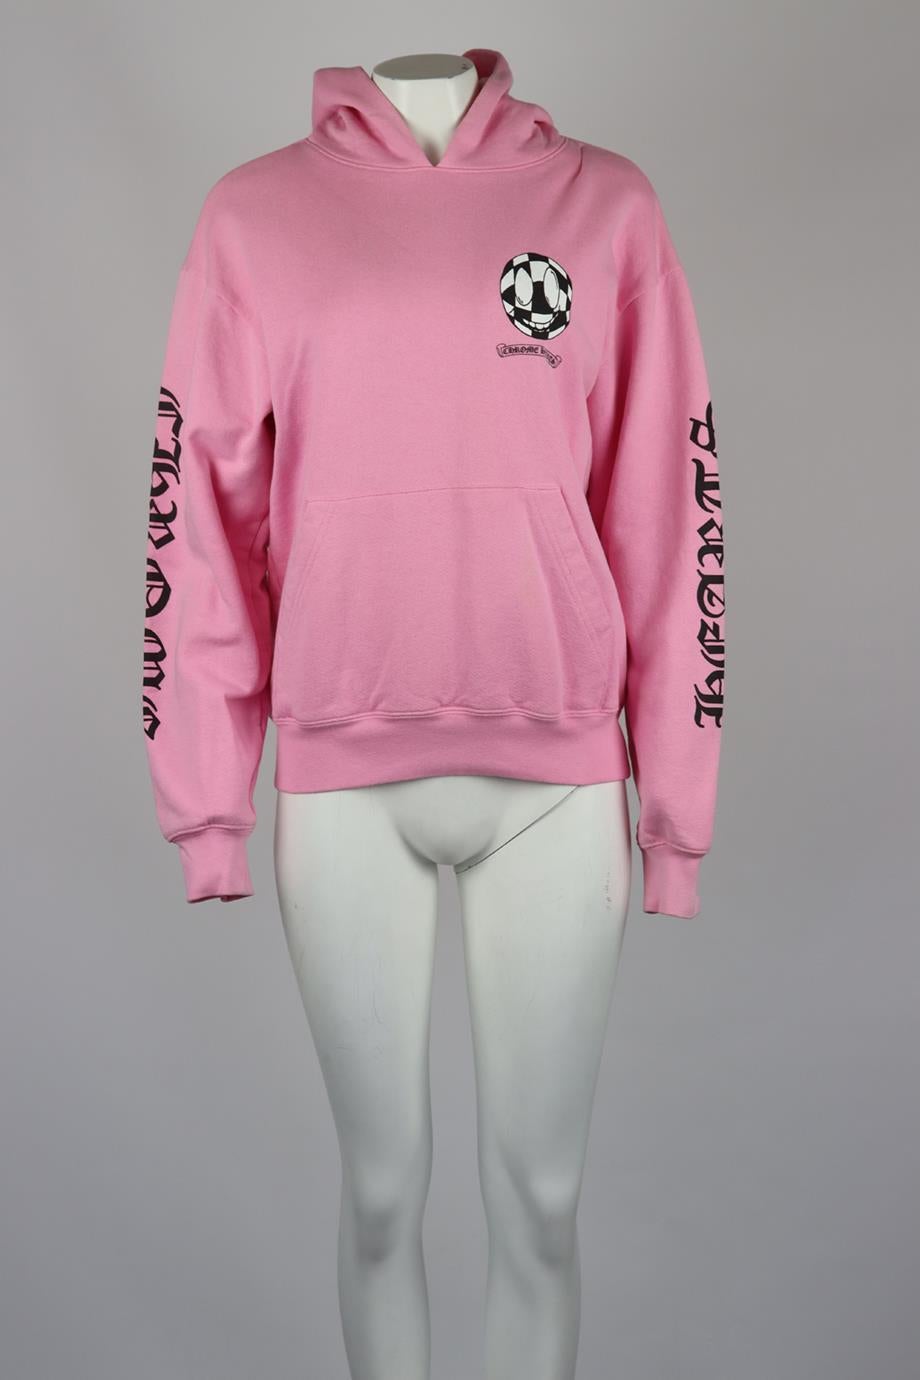 Chrome Hearts + Matty Boy Printed Cotton Jersey Hoodie. Pink. Long Sleeve. Crewneck. Slips on. 100% Cotton. Size: Medium (UK 10, US 6, FR 38, IT 42). Bust: 44 In. Waist: 42.5 In. Hips: 37.2 In. Length: 24.1 In. Condition: Used. Very good condition -